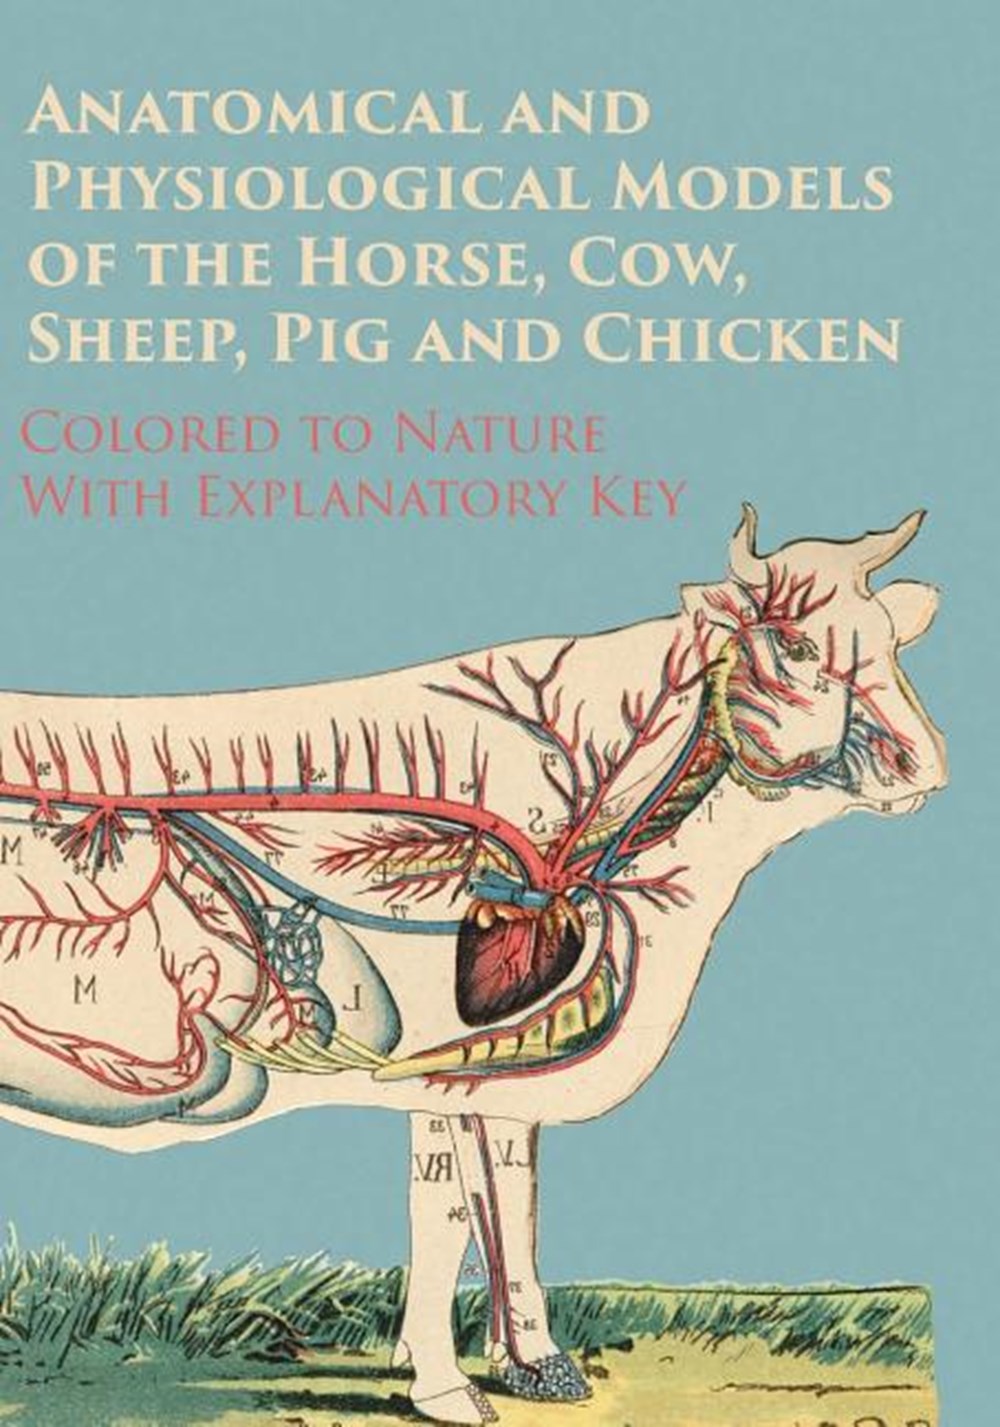 Anatomical and Physiological Models of the Horse, Cow, Sheep, Pig and Chicken - Colored to Nature - 